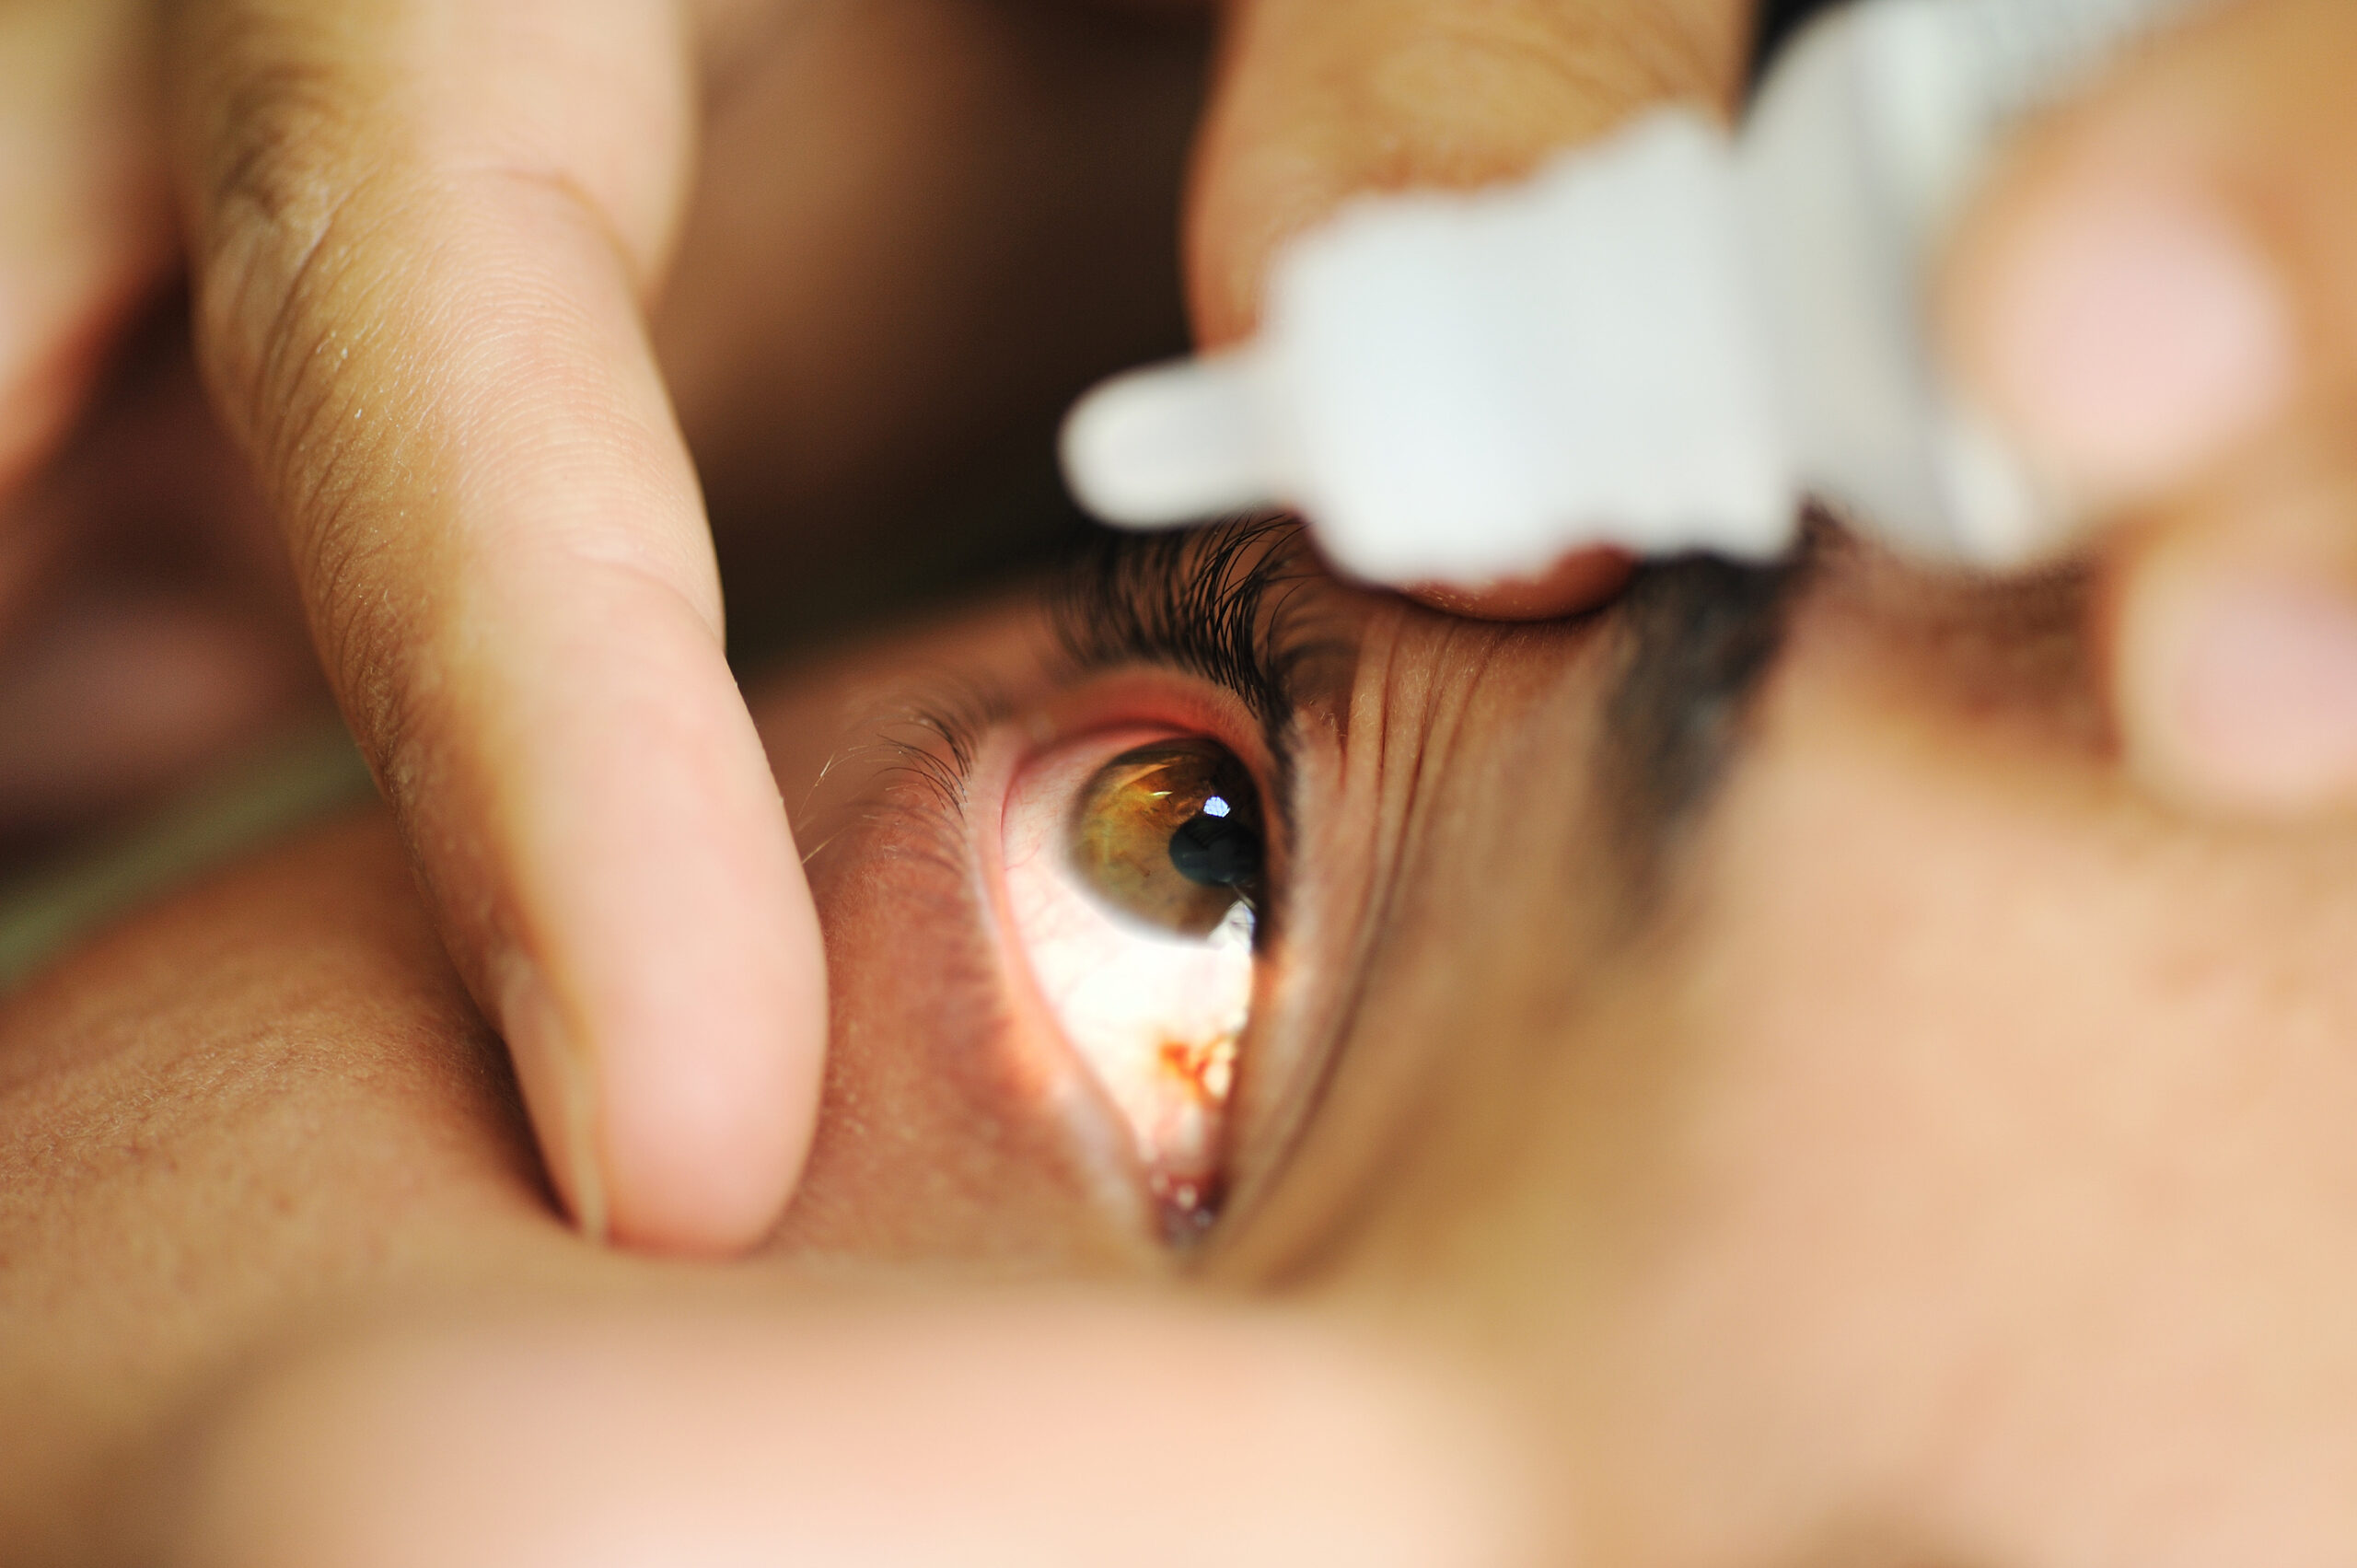 Death Toll Rises as Contaminated Eye Drops Cause Additional Antibiotic-Resistant Infections